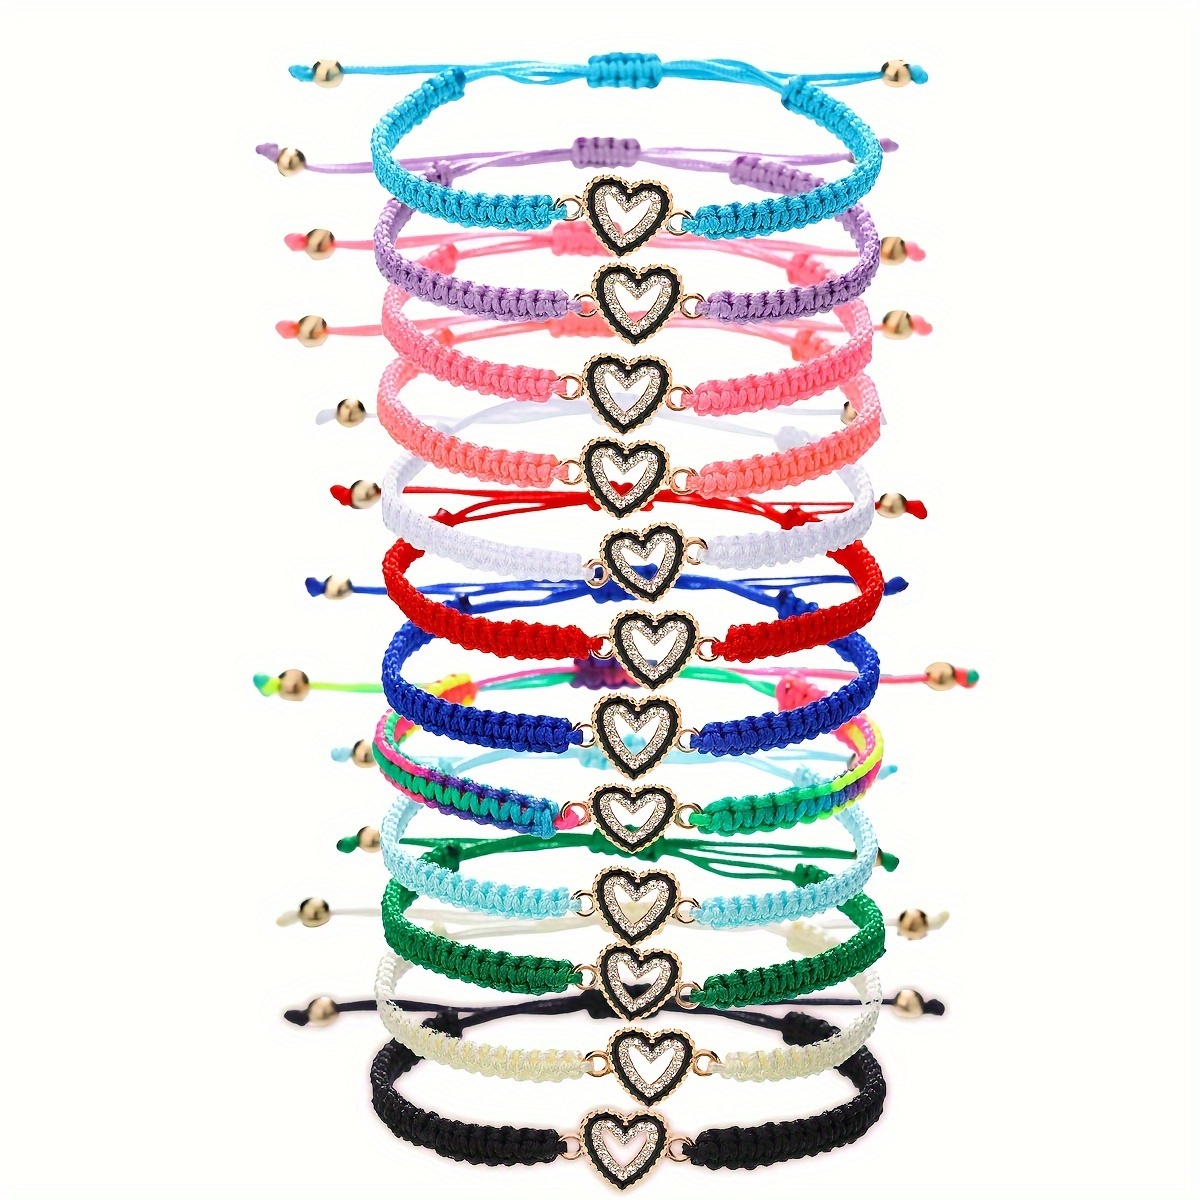 

12pcs Bohemian Adjustable Heart Charm Bracelets Set, Colorful Braided String With Random Colors, Romantic Gift For Lover, Playful Style Jewelry